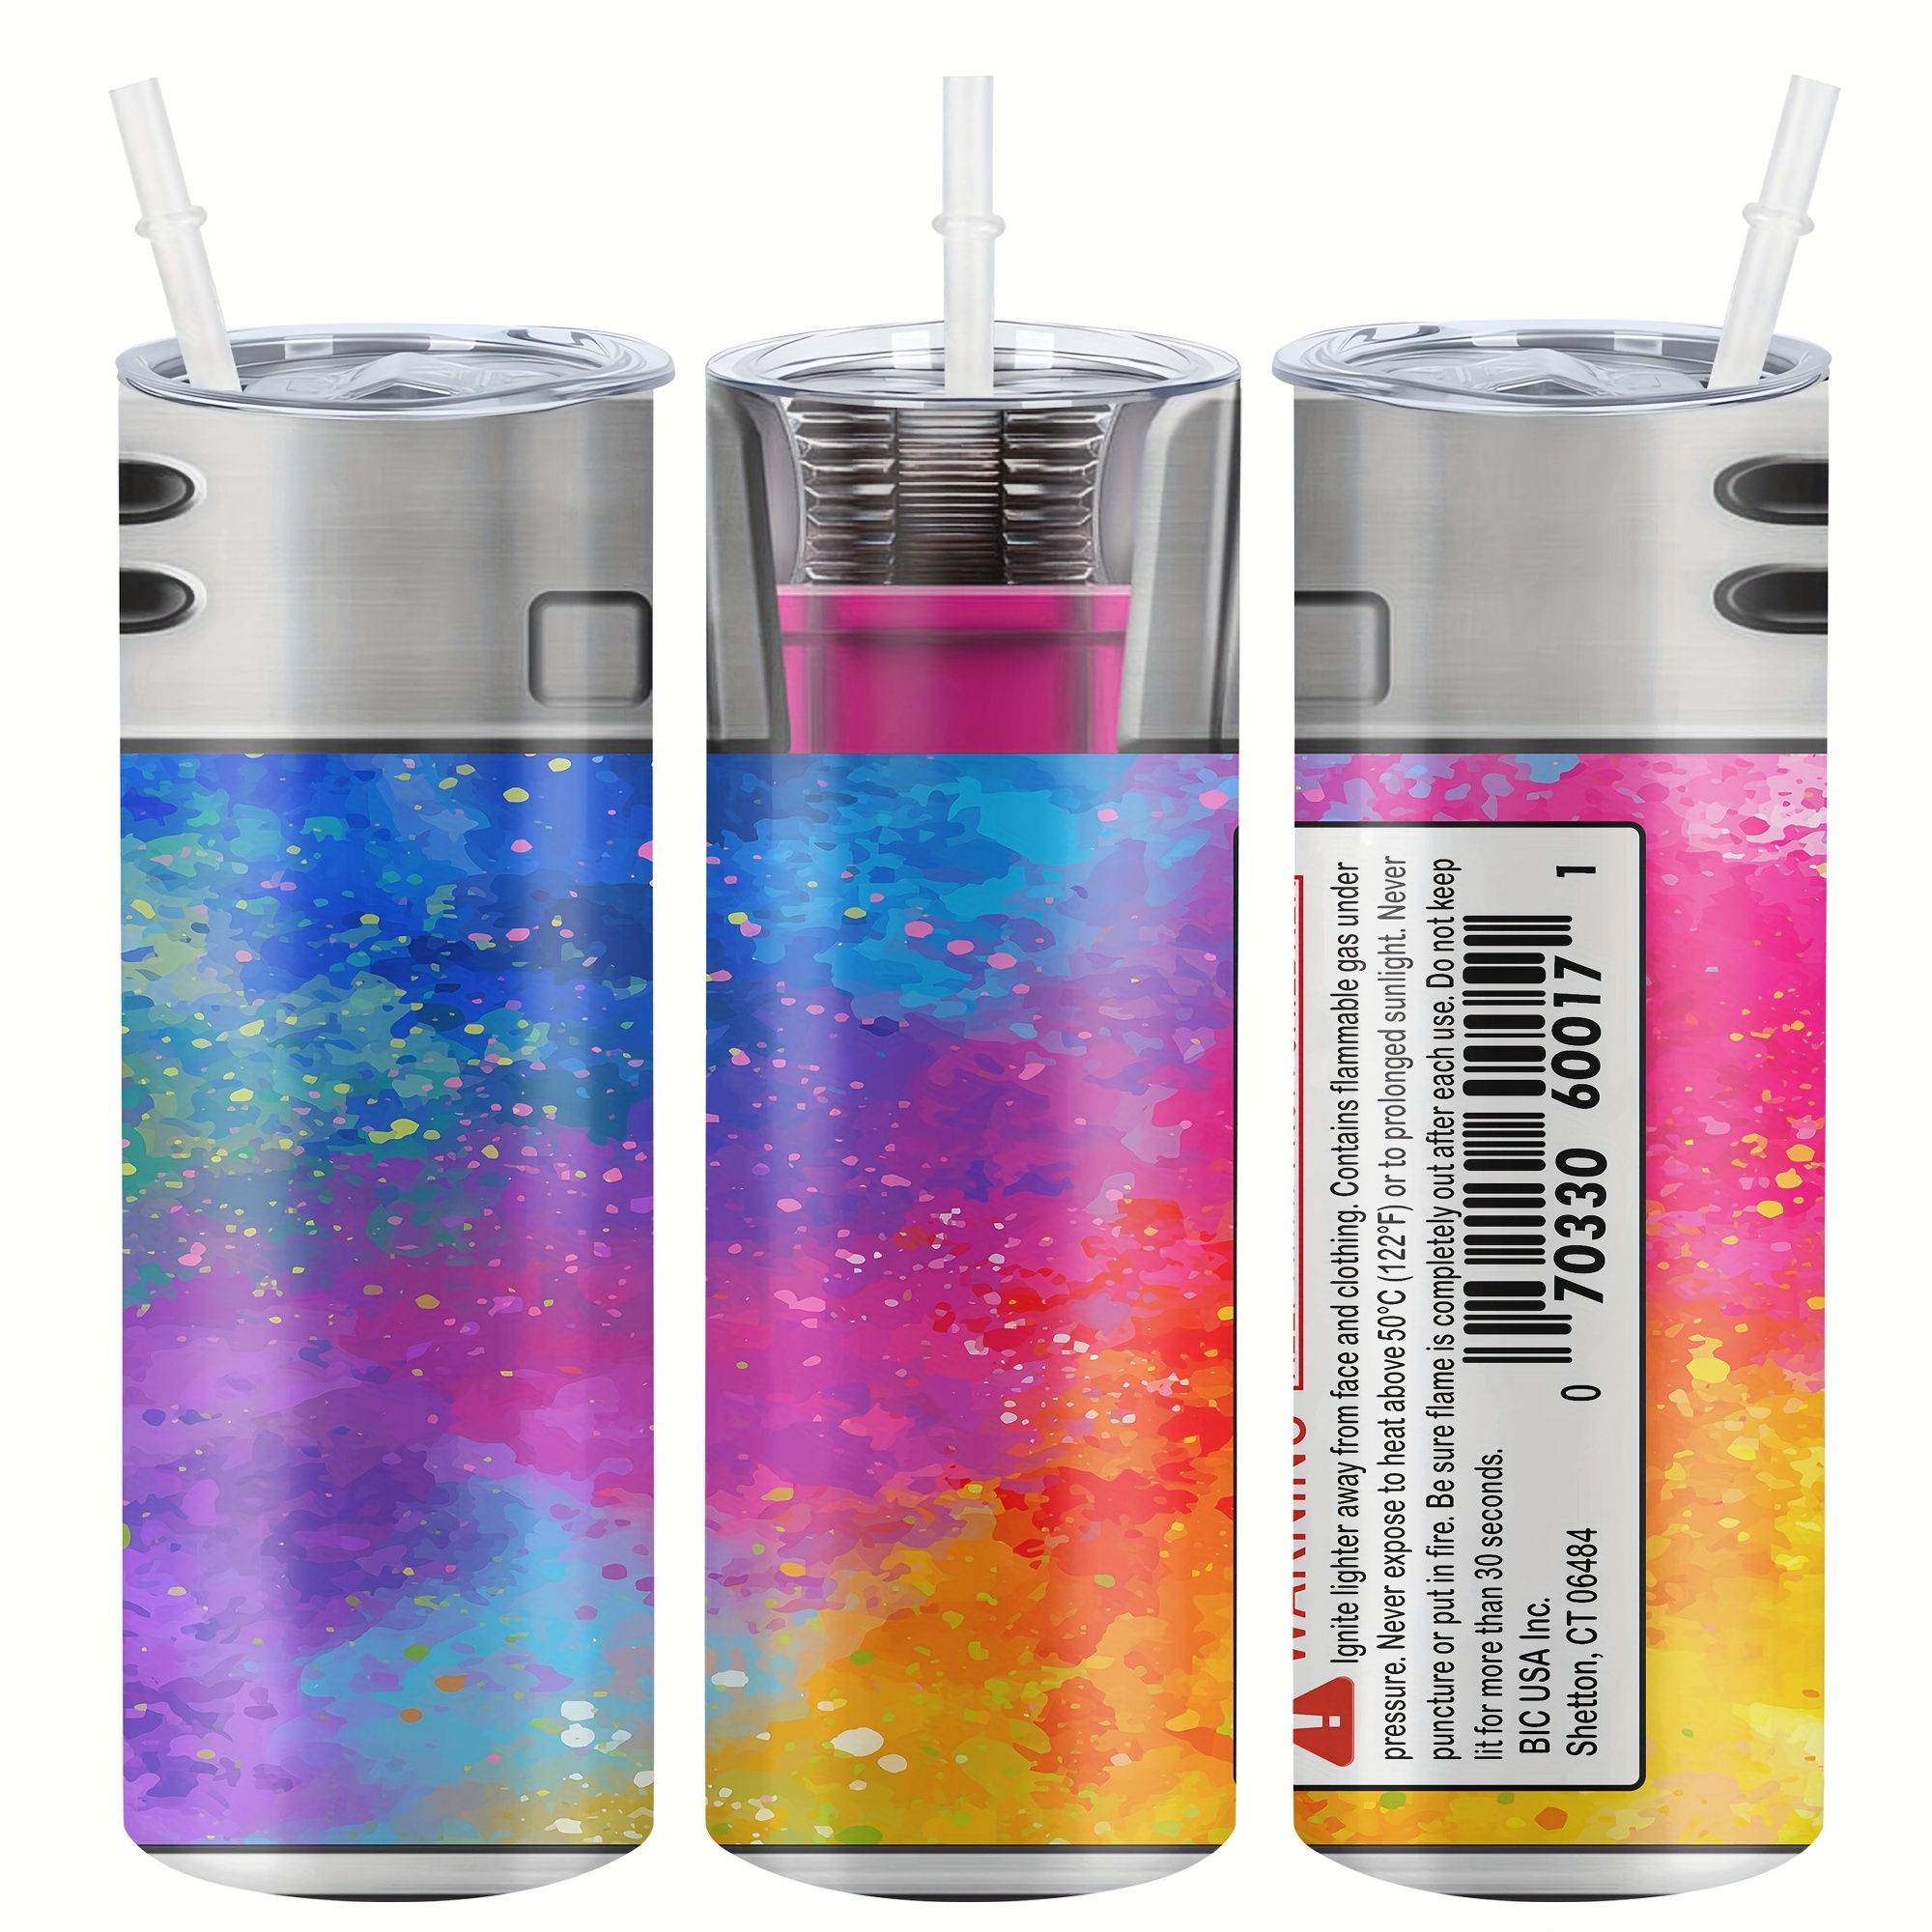 

20 Oz Insulated Stainless Steel Water Bottle With Lid & Straw - Perfect For All Seasons, Outdoor Adventures, And Gifts